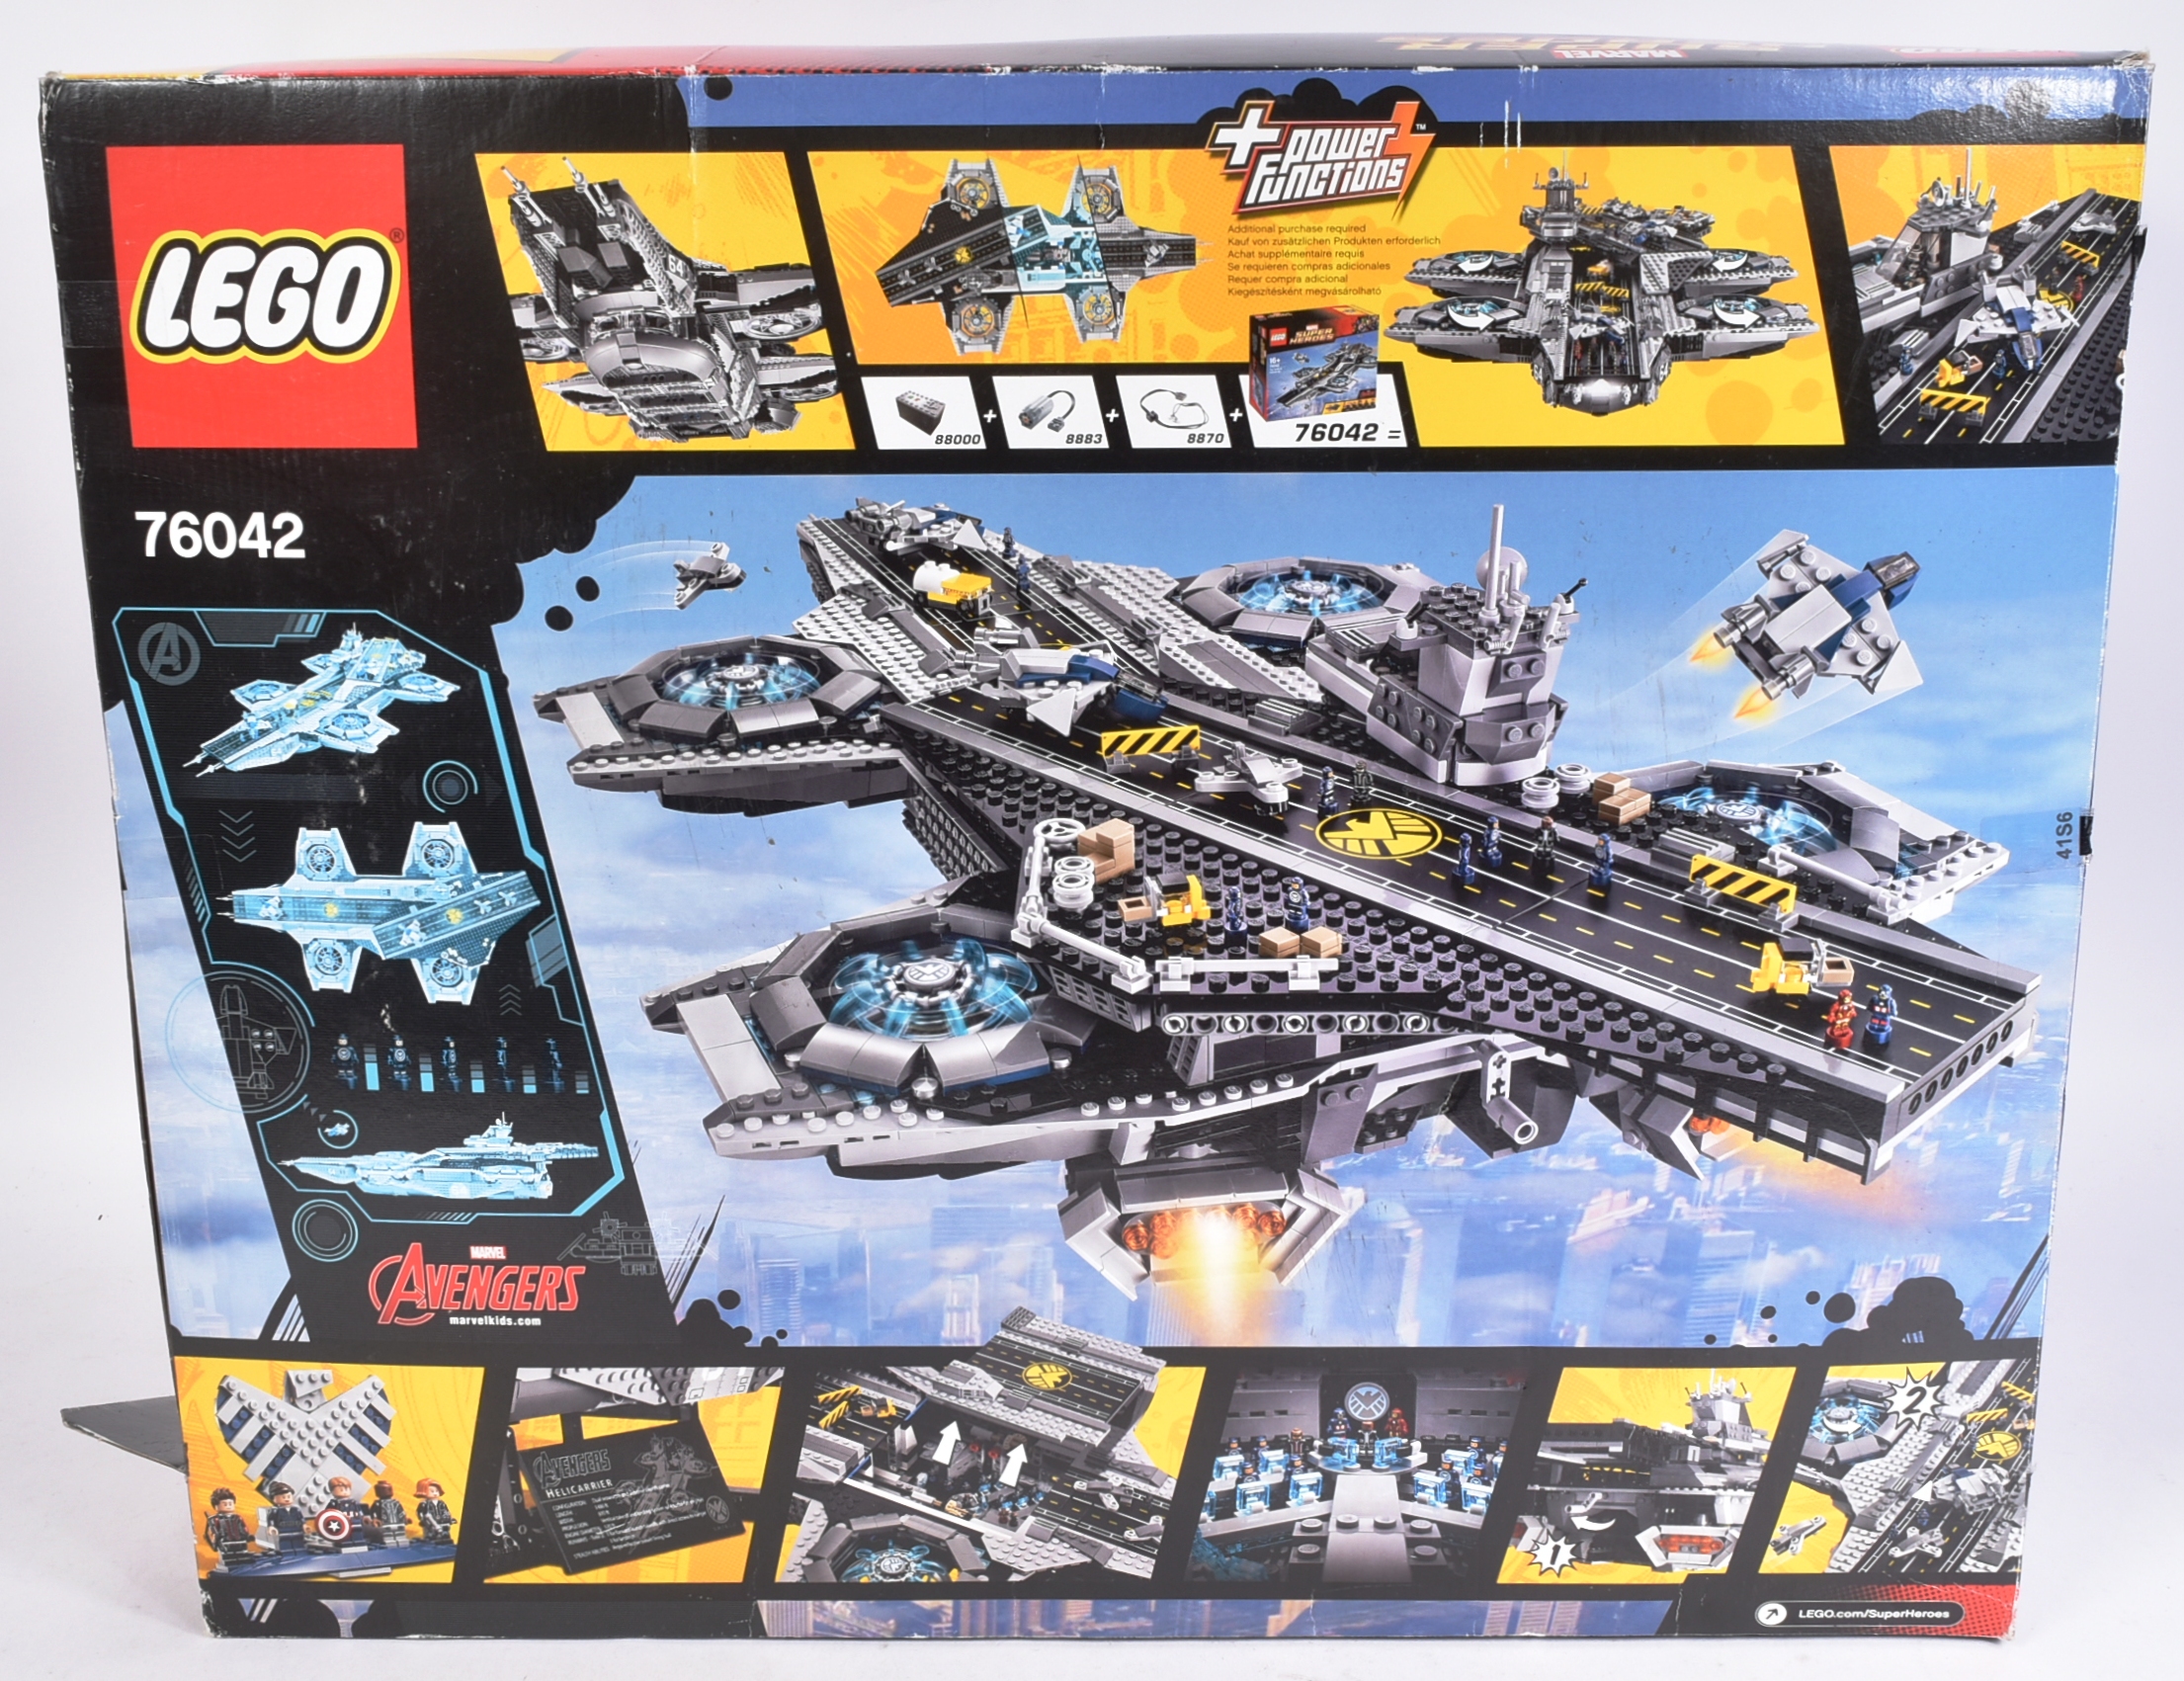 LEGO - MARVEL - SUPER HEROES - 76042 - THE SHIELD HELICARRIER - Image 2 of 5